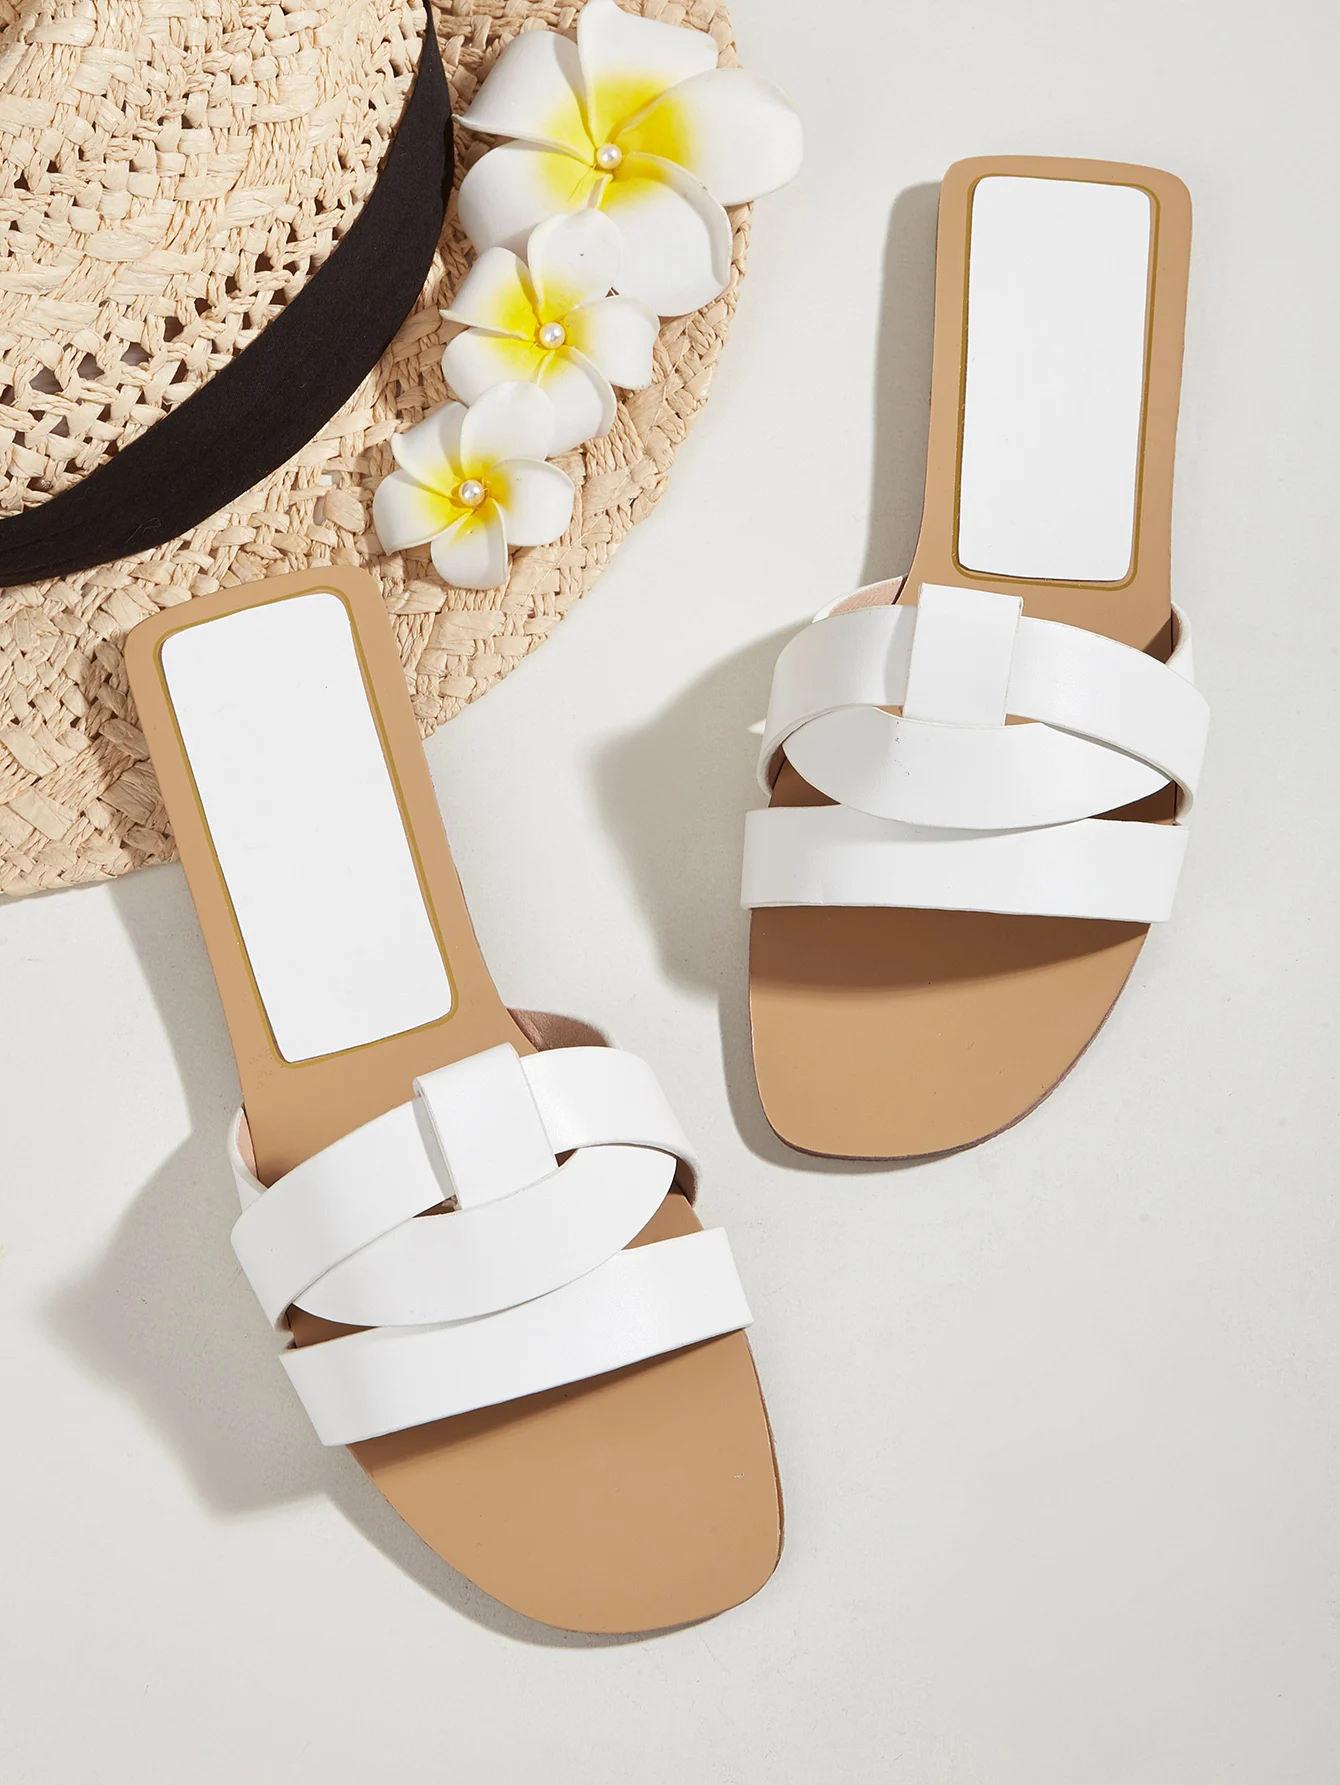 

Zar a Woman 2021 Flat Shoes Spring Summer New Fashion Square Toe Cross Belt Women's Flat-Heeled Beach With Sandals For Women Hot